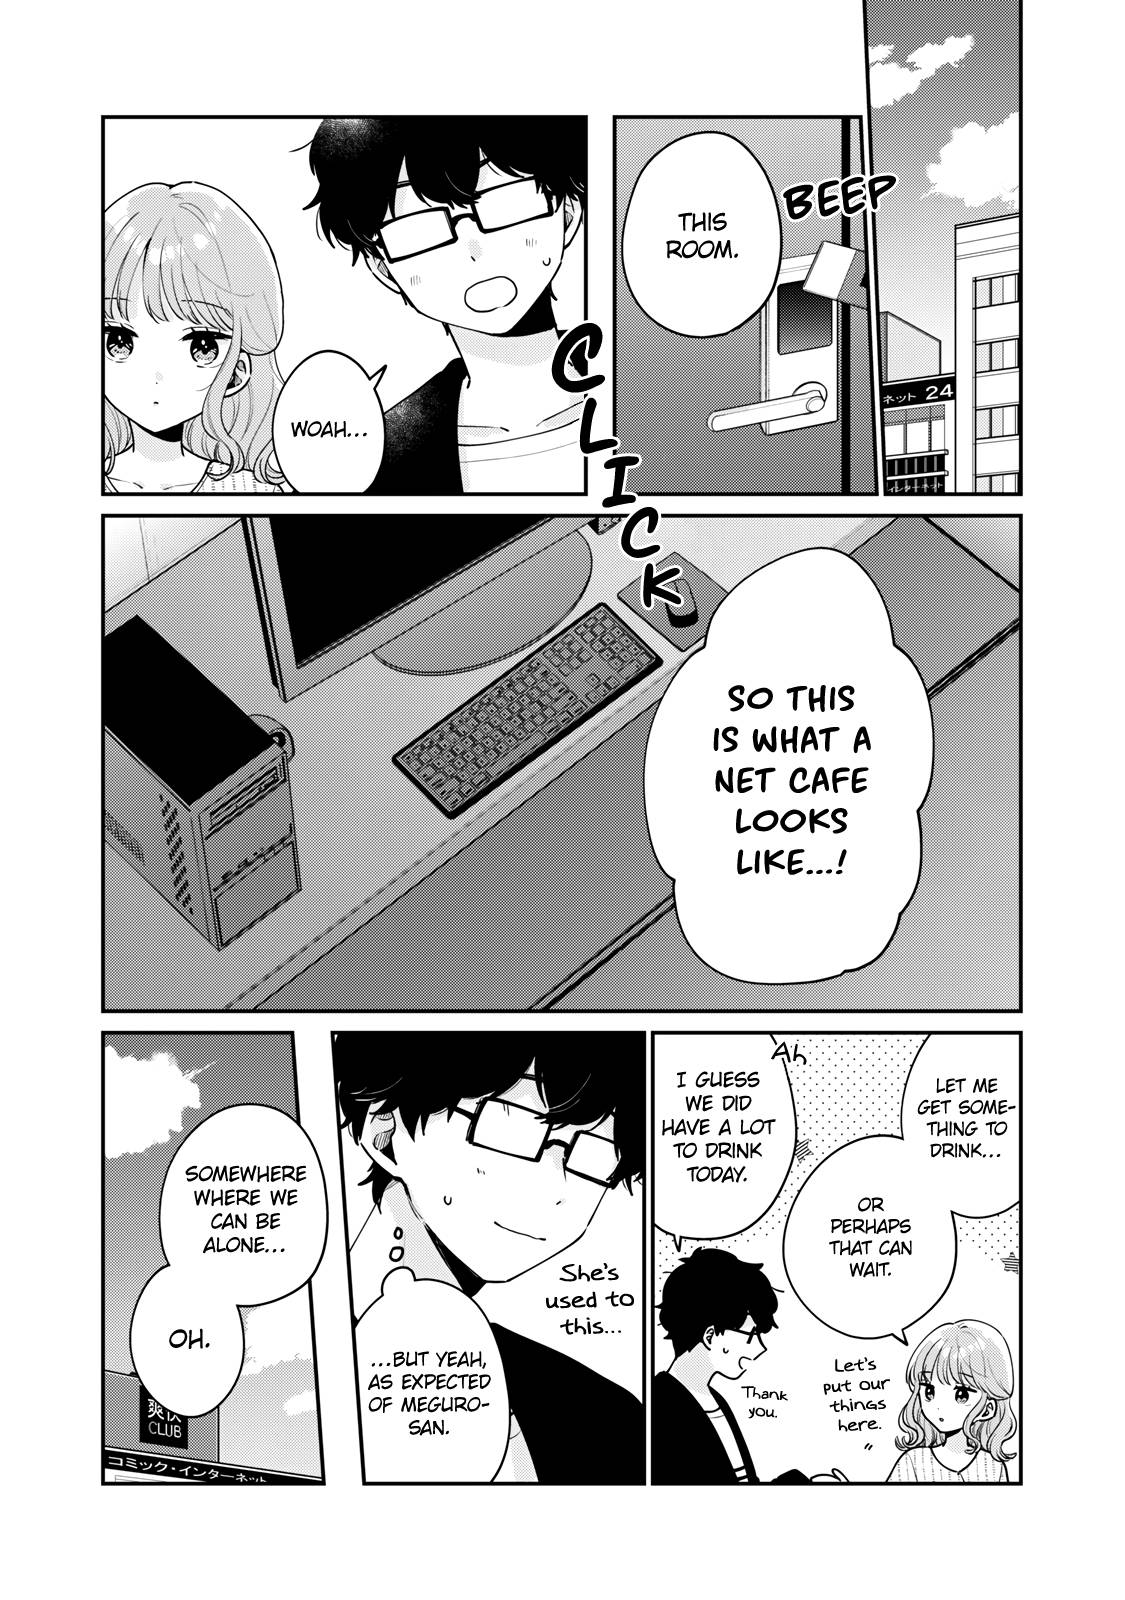 It's Not Meguro-san's First Time chapter 57 page 2